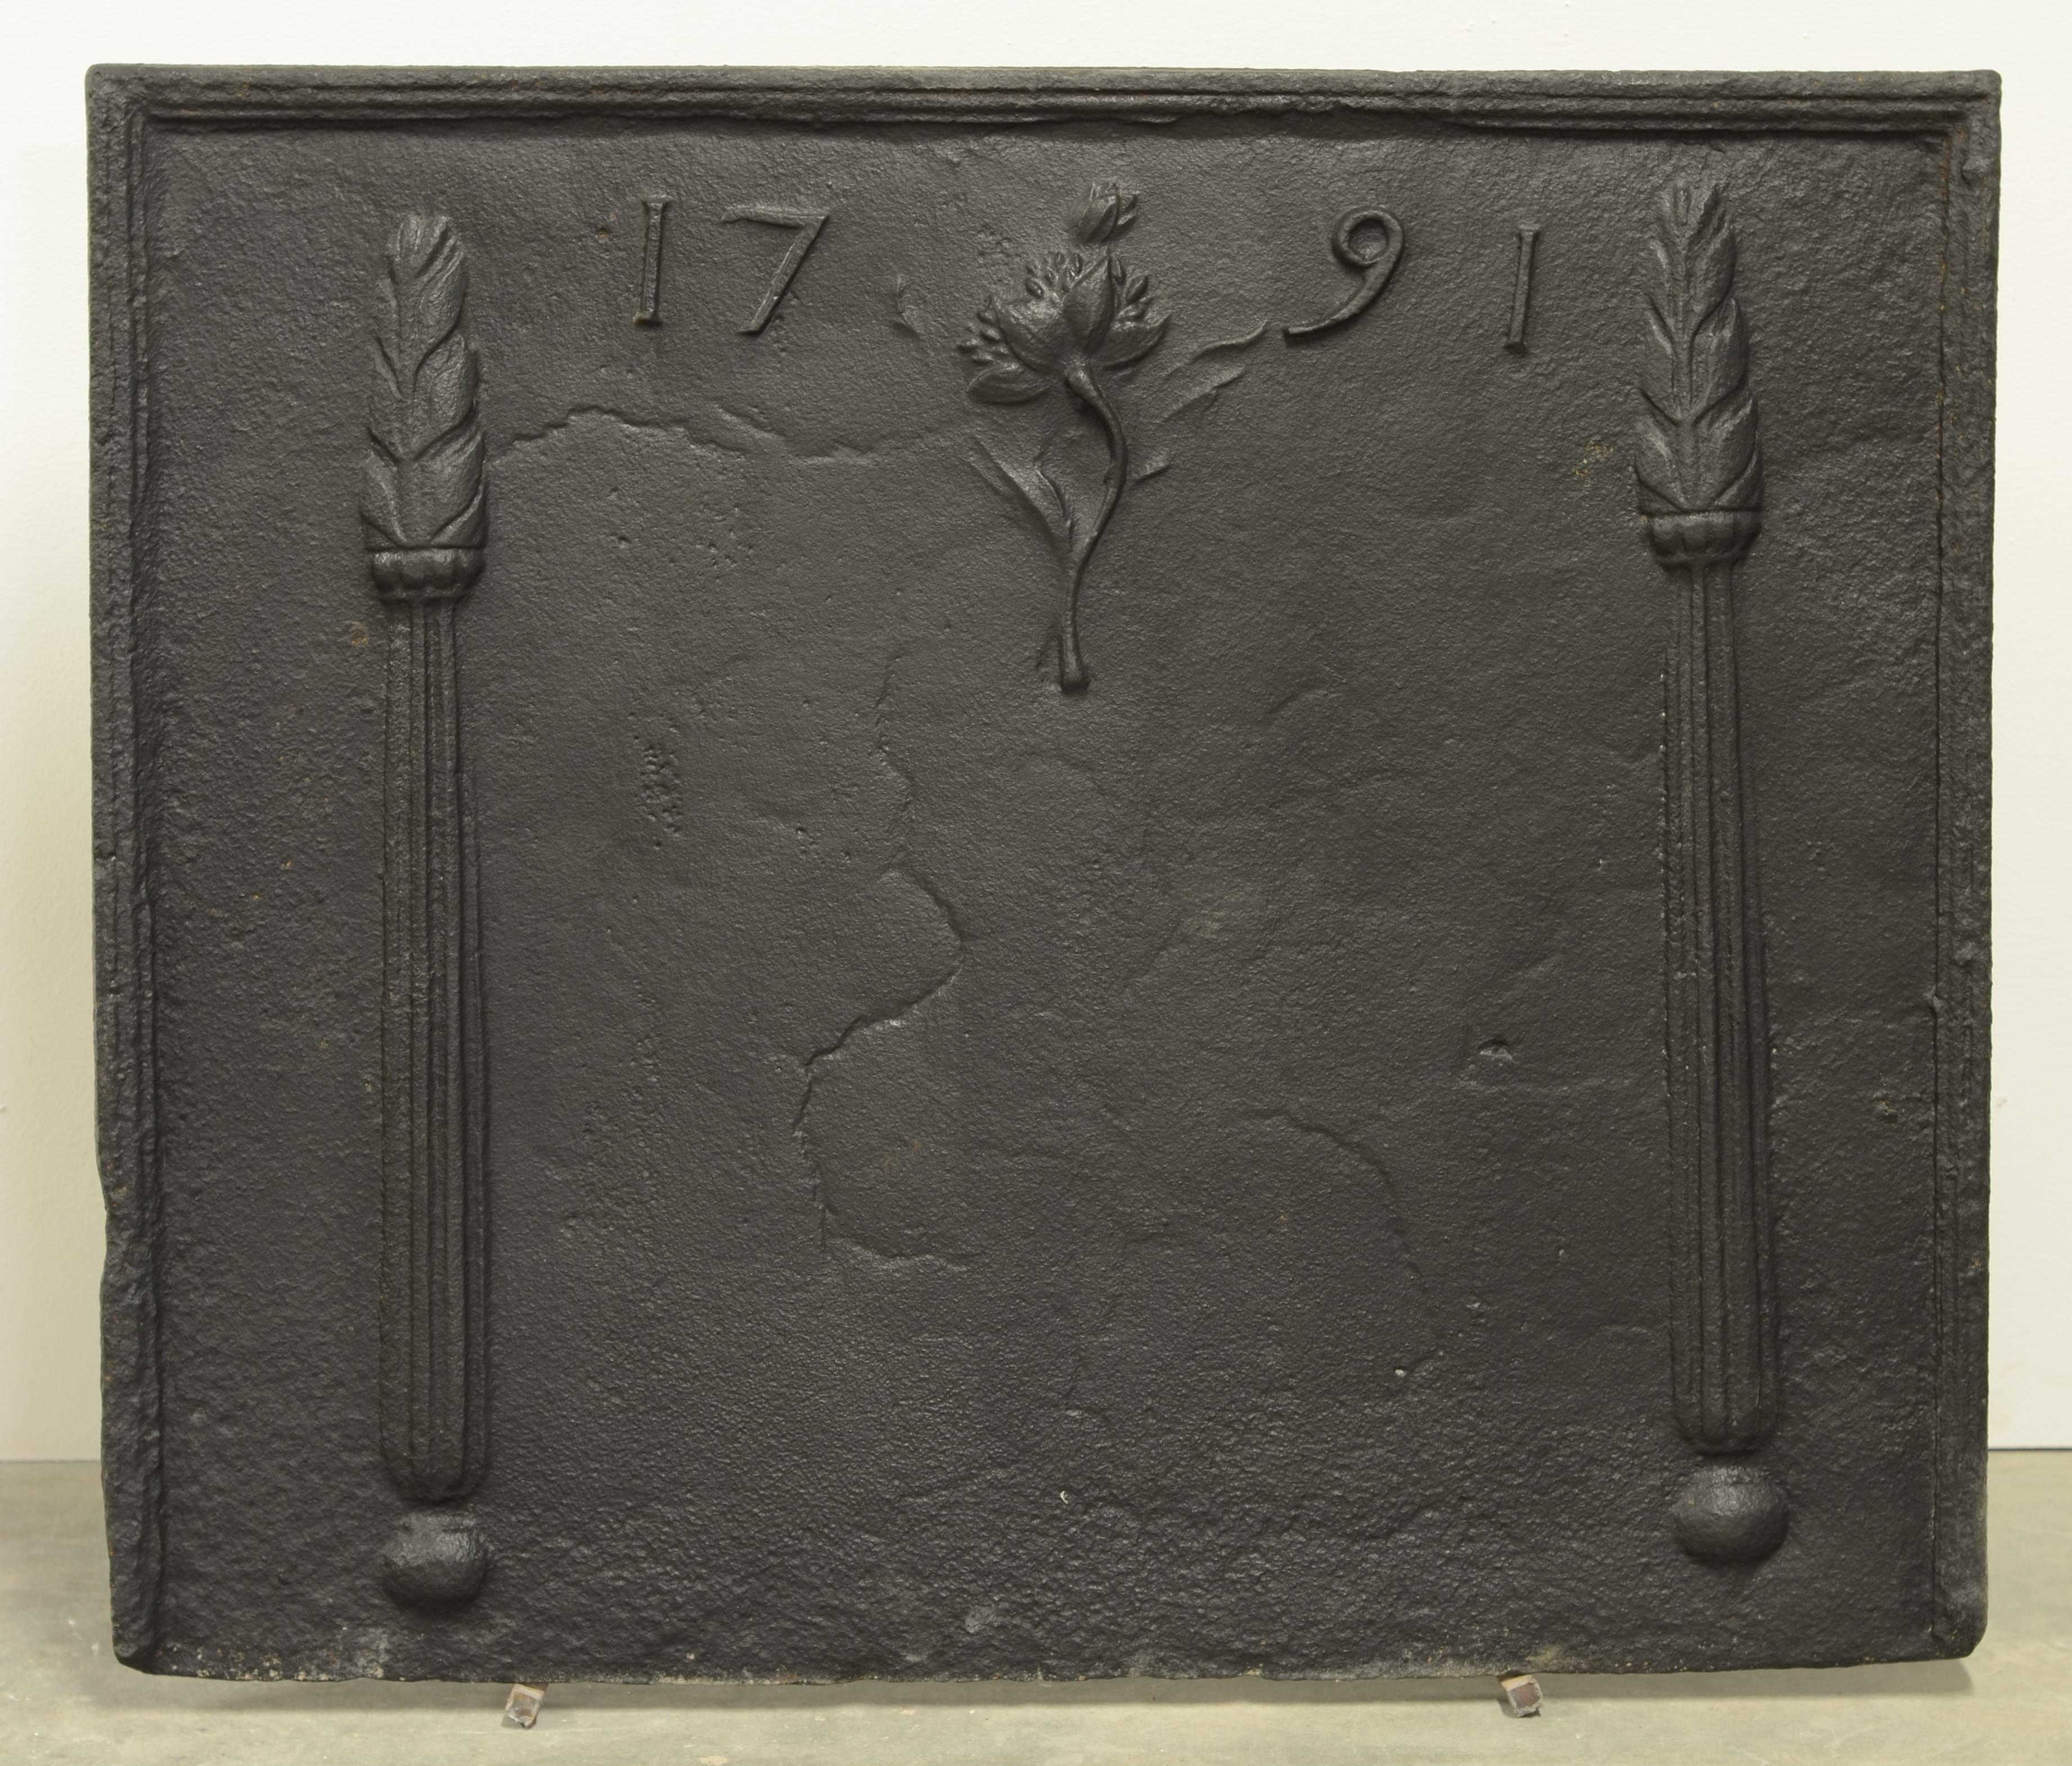 Beautiful 18th century antique cast iron fireback with two fire torches besides the date 1791 and a incredible flower in the centre.

Great original condition, perfect size.
Can be used as a fireback or backsplash.
 